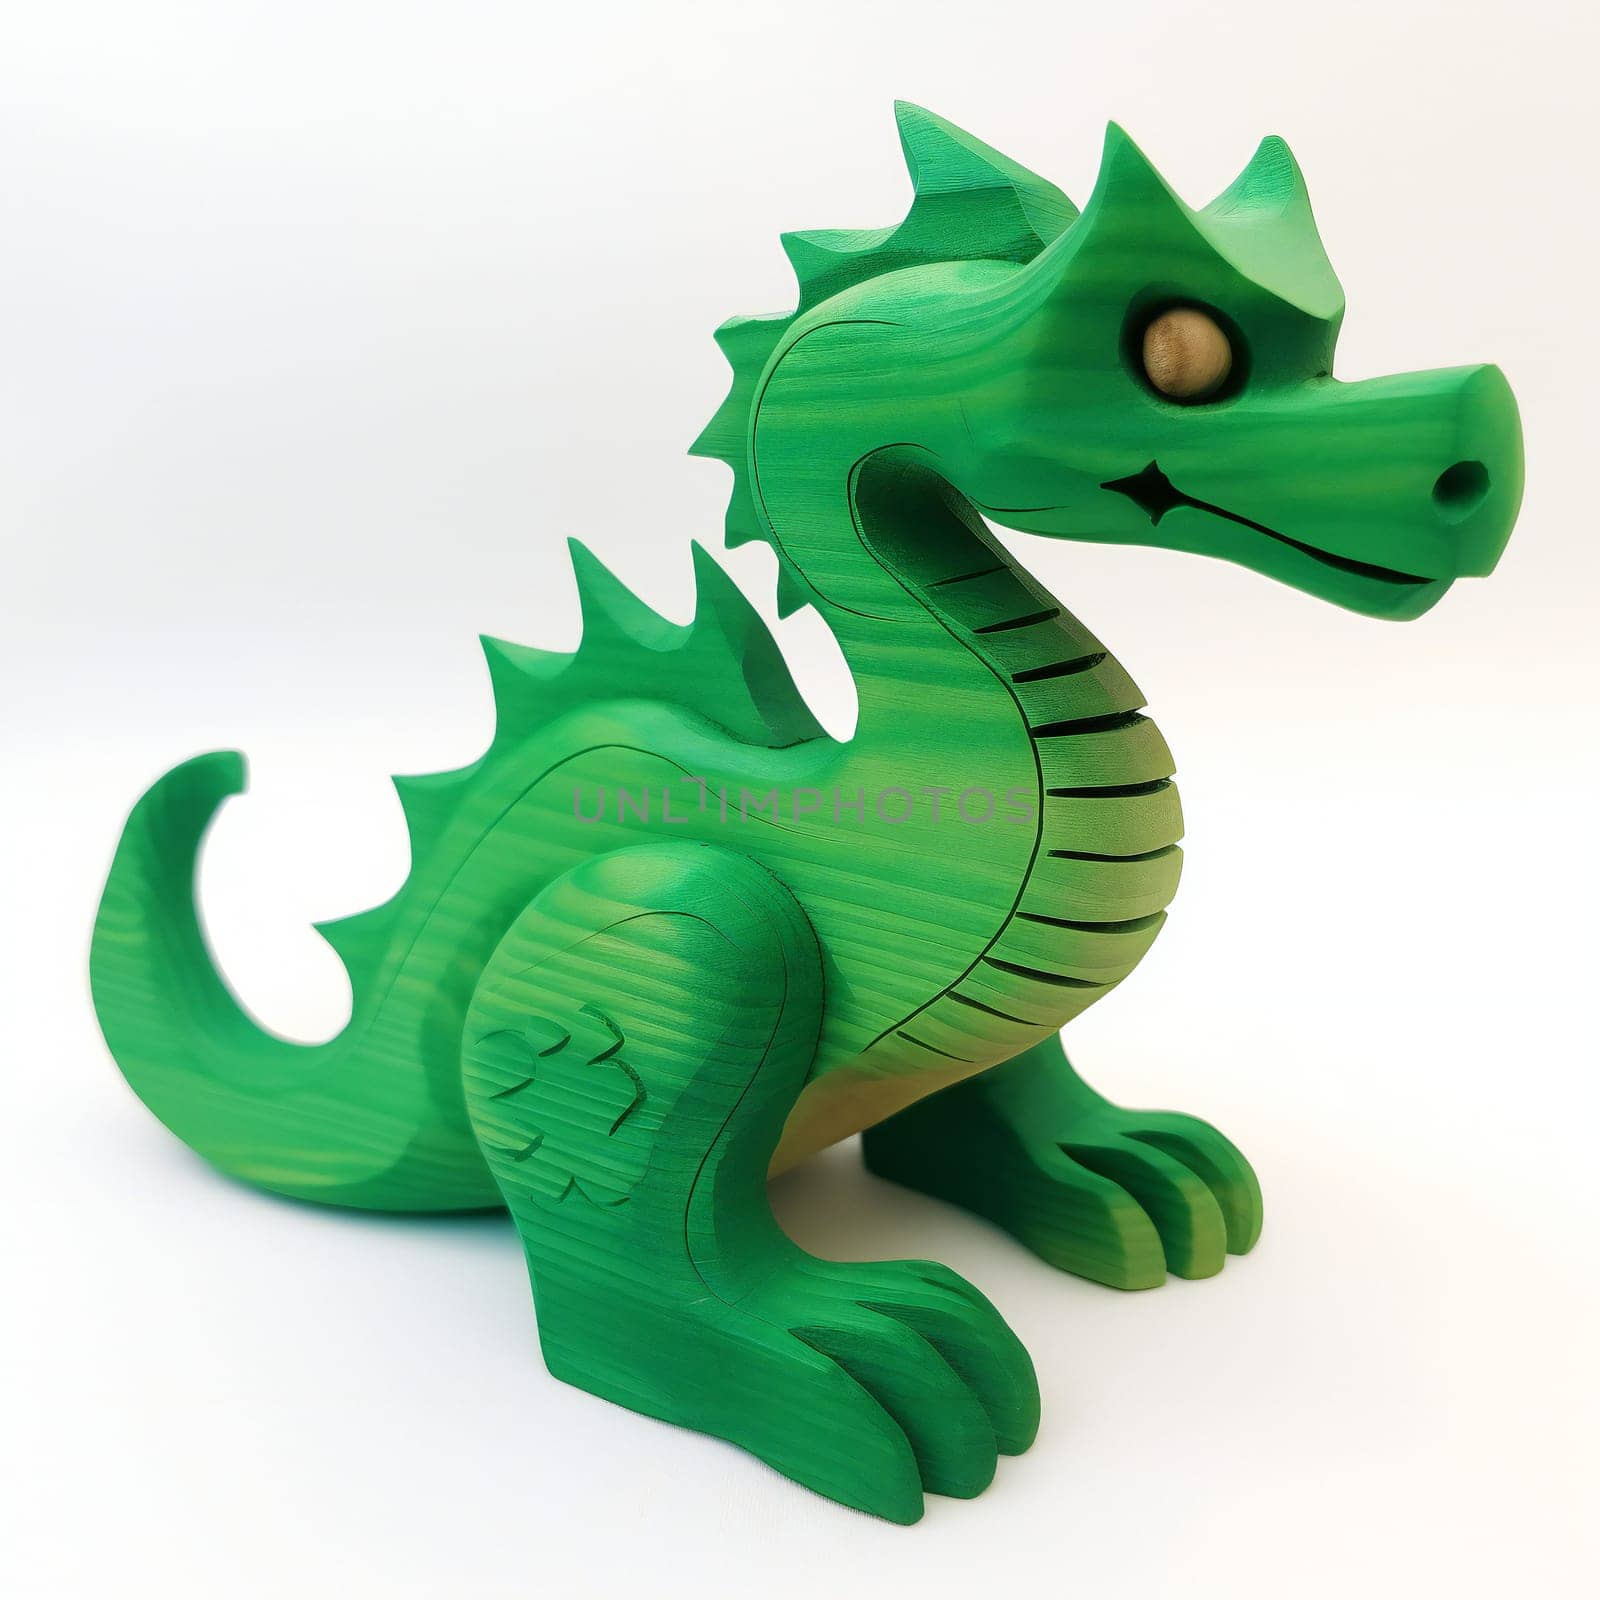 A closeup shot of a small wooden dragon toy on white backgroun isolated.